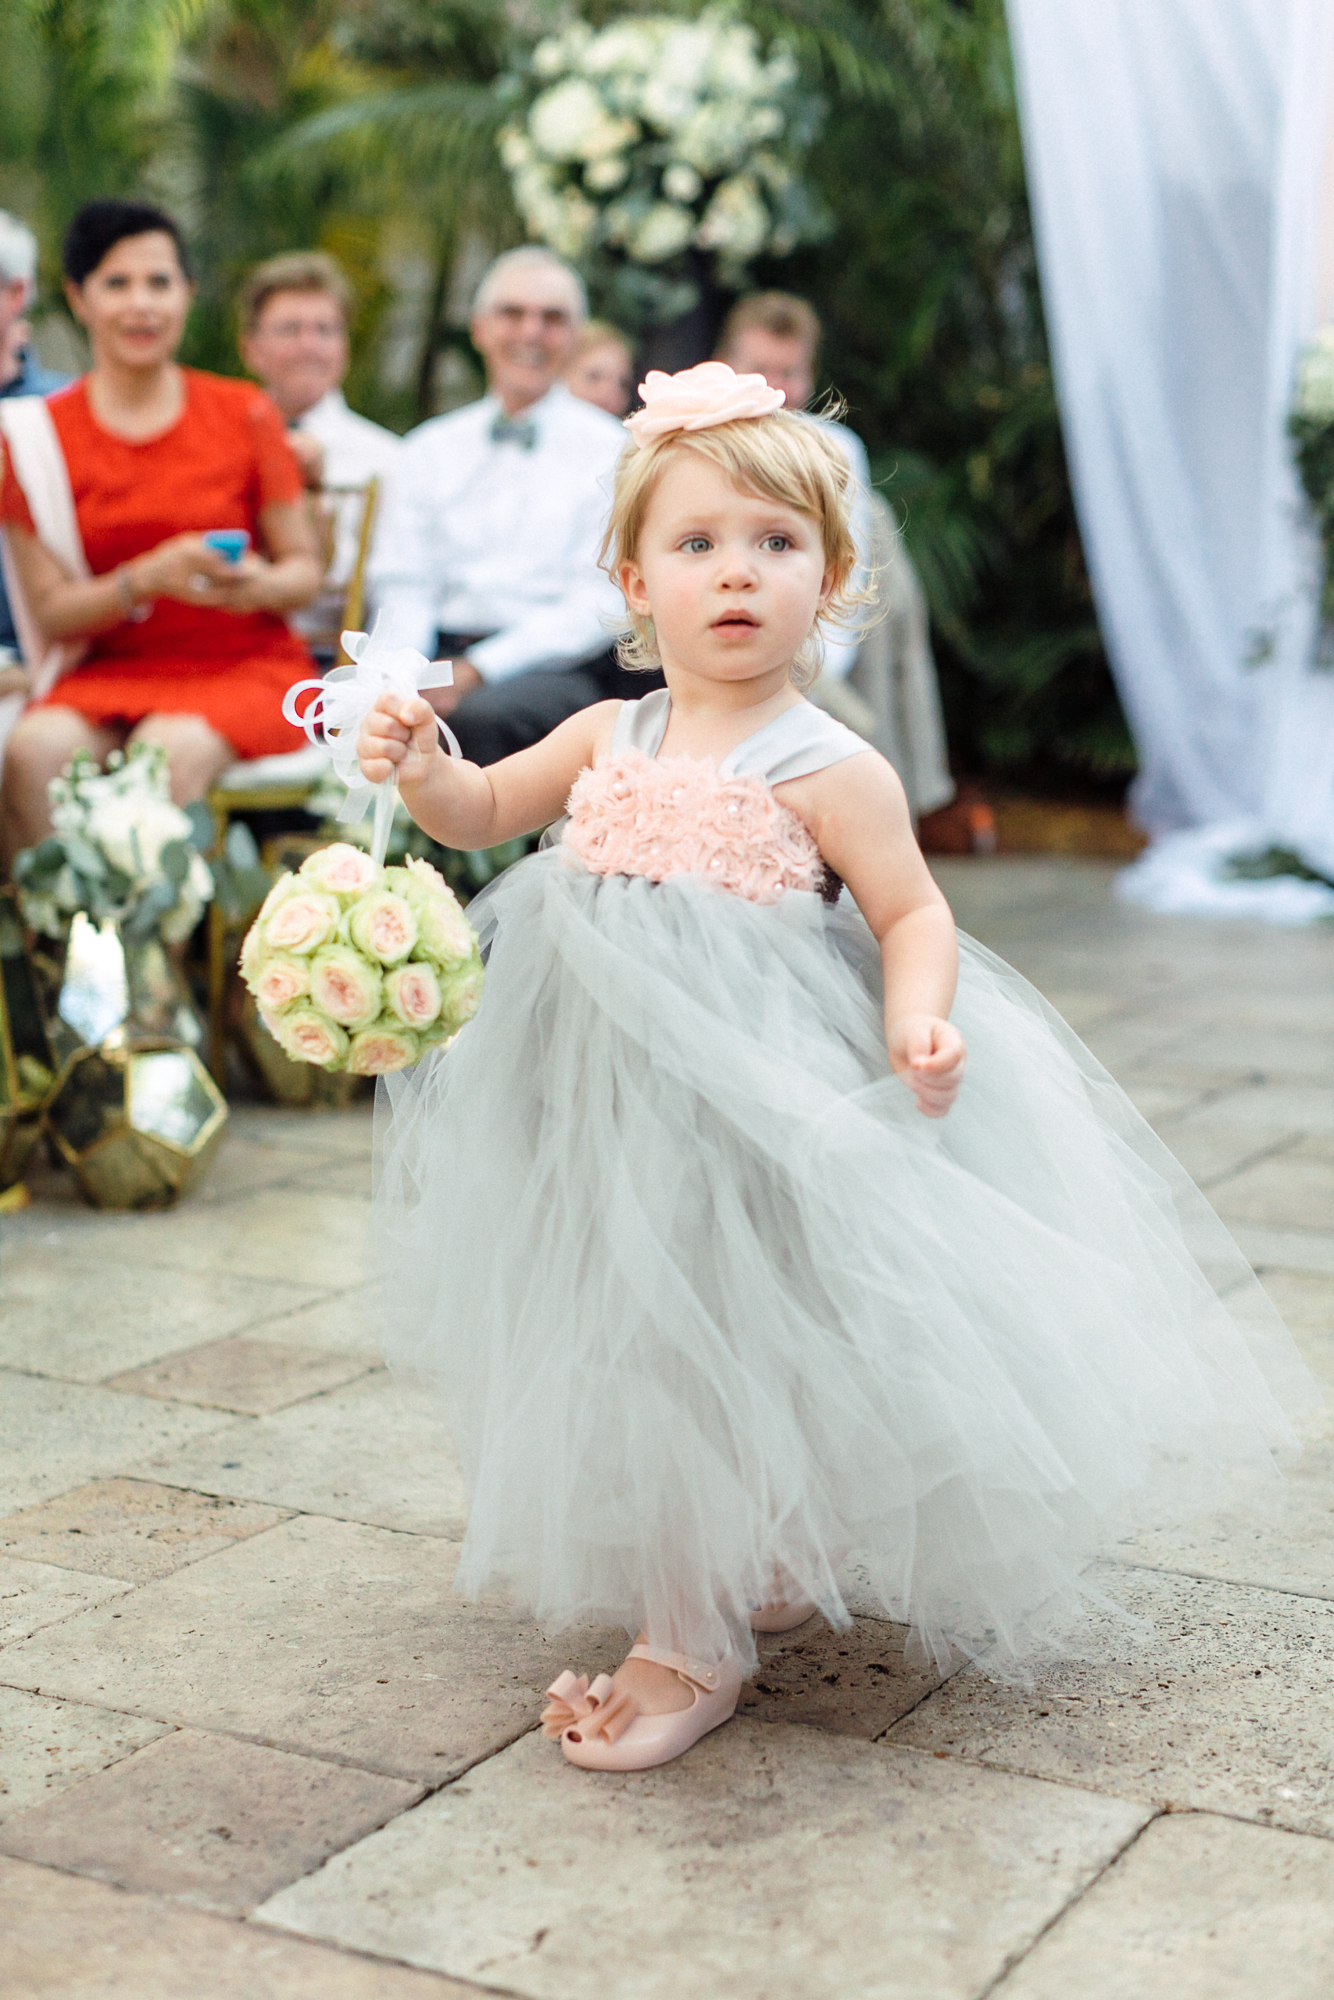 The cutest flower girl outfit featured tons of tulle in the wedding colors and a pomander ball